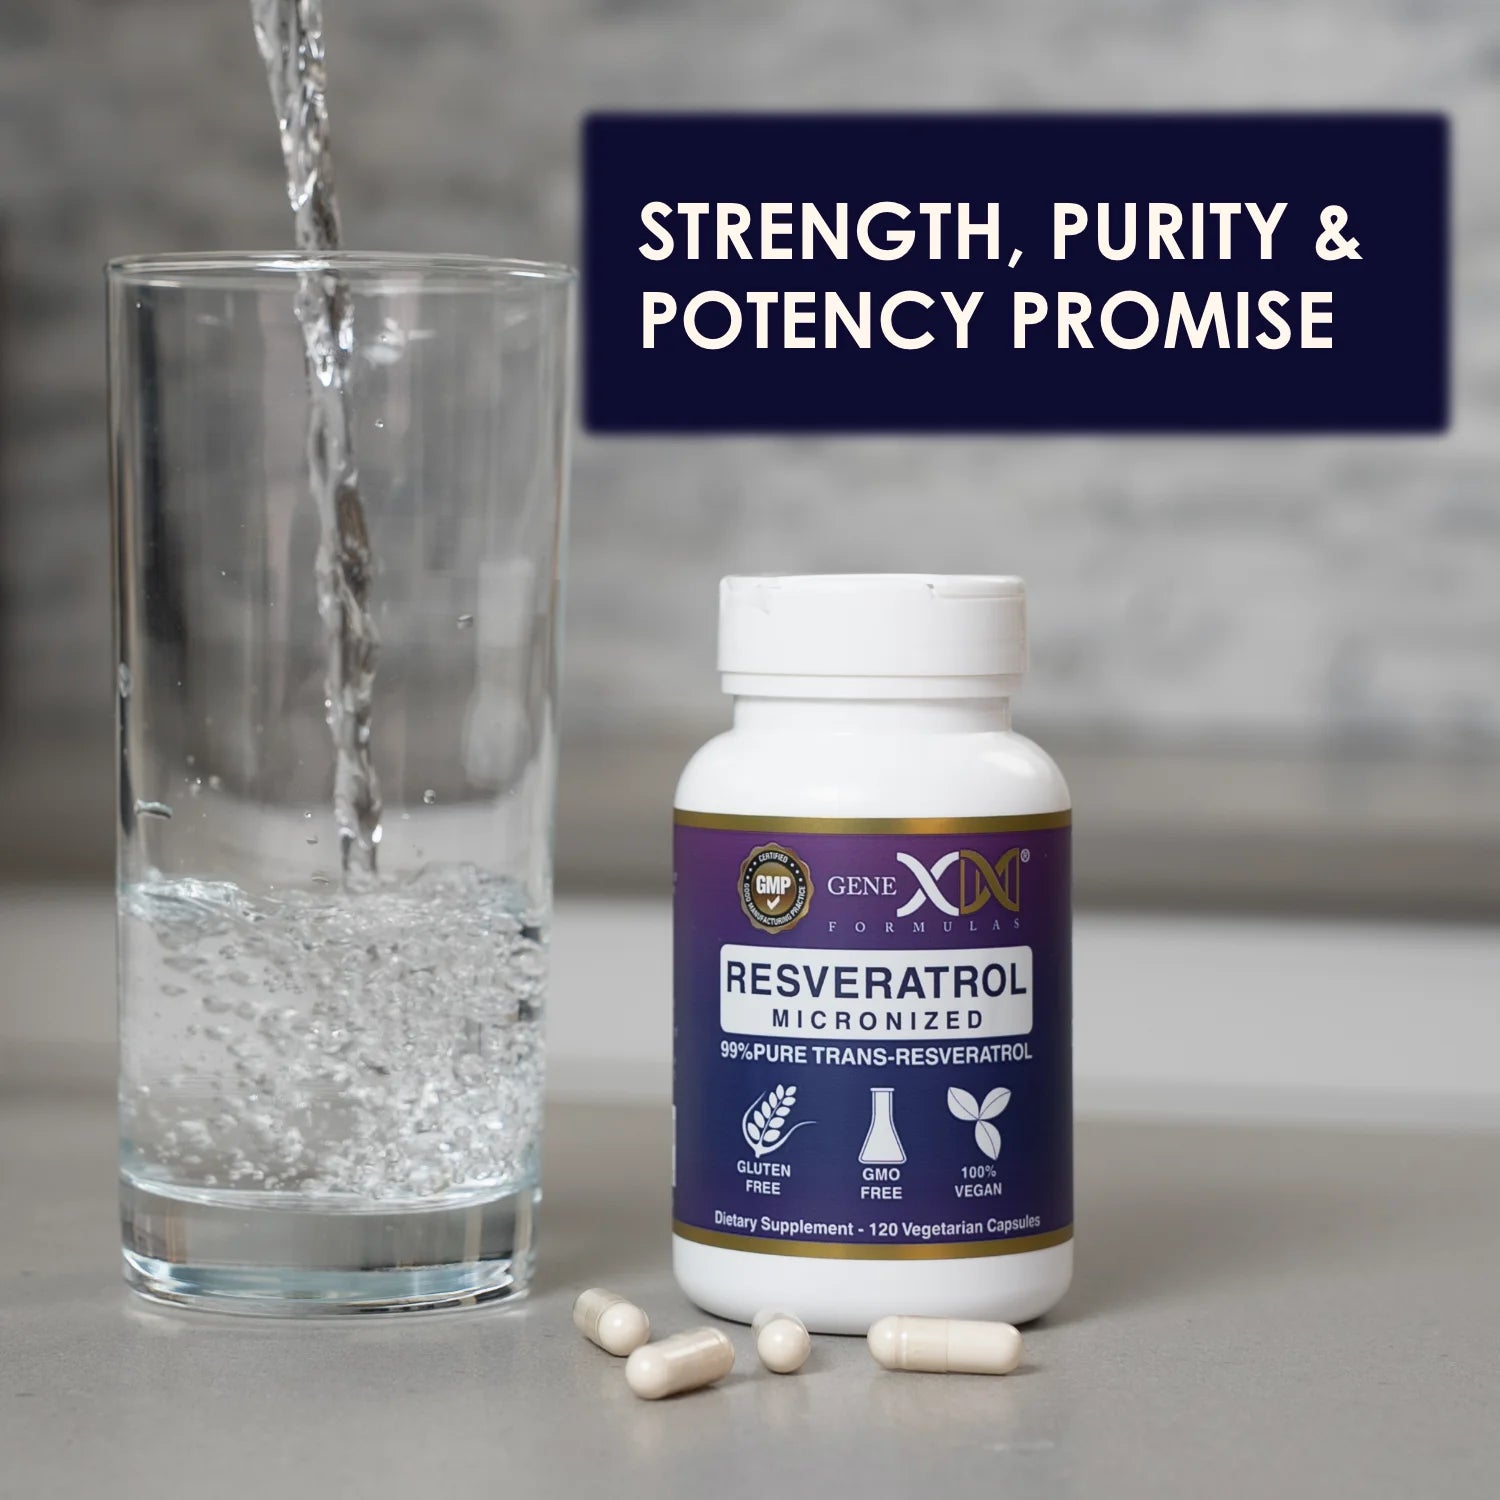 Genex resveratrol supplement bottle next to a clear glass with water being poured into it. Text on the image reads "Strength, Purity & Potency promise" 